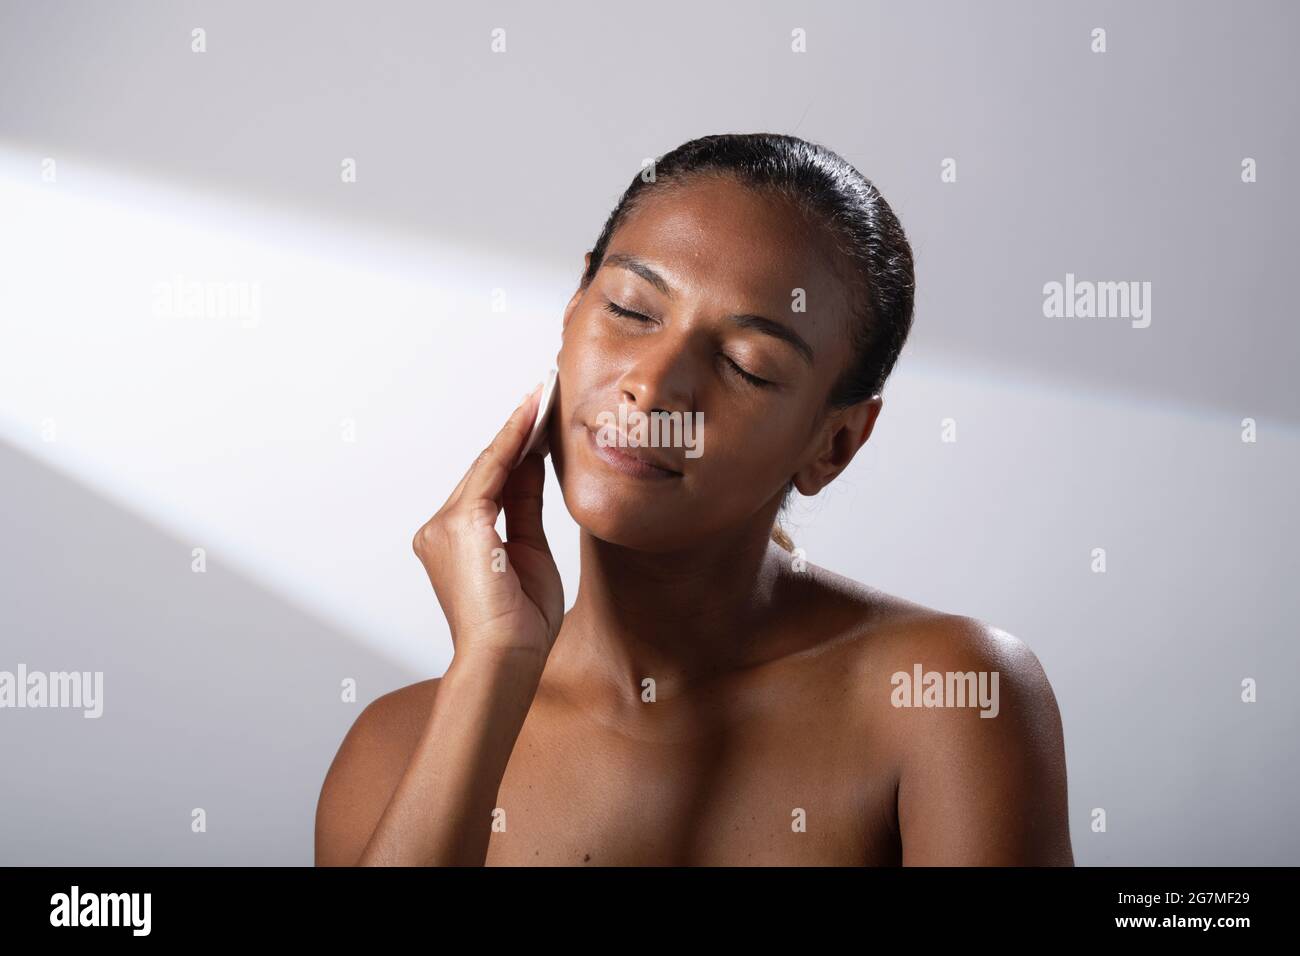 Beauty images of a woman with darker skin tone. Head and shoulder pictures of contented, happy lady using cotton face pads. Stock Photo